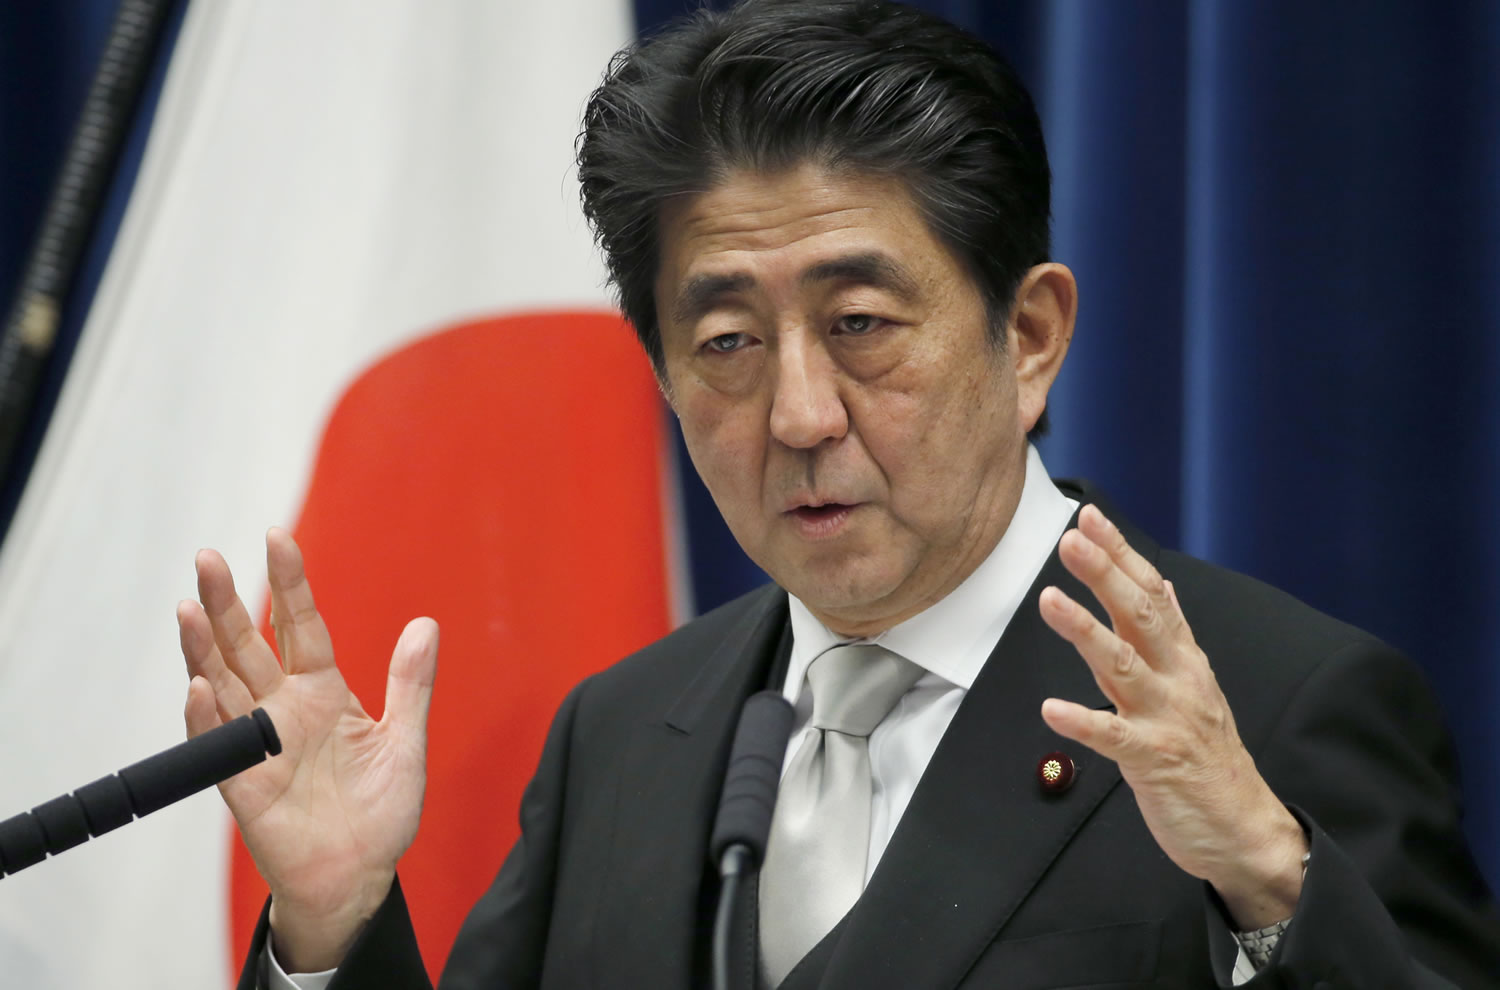 Japan's Prime Minister Shinzo Abe speaks during a press conference at his official residence in Tokyo Wednesday, Dec. 24, 2014. Abe took office Wednesday for a third term as Japan's prime minister, appointing a former military officer as his defense minister but keeping the other members of his previous Cabinet.